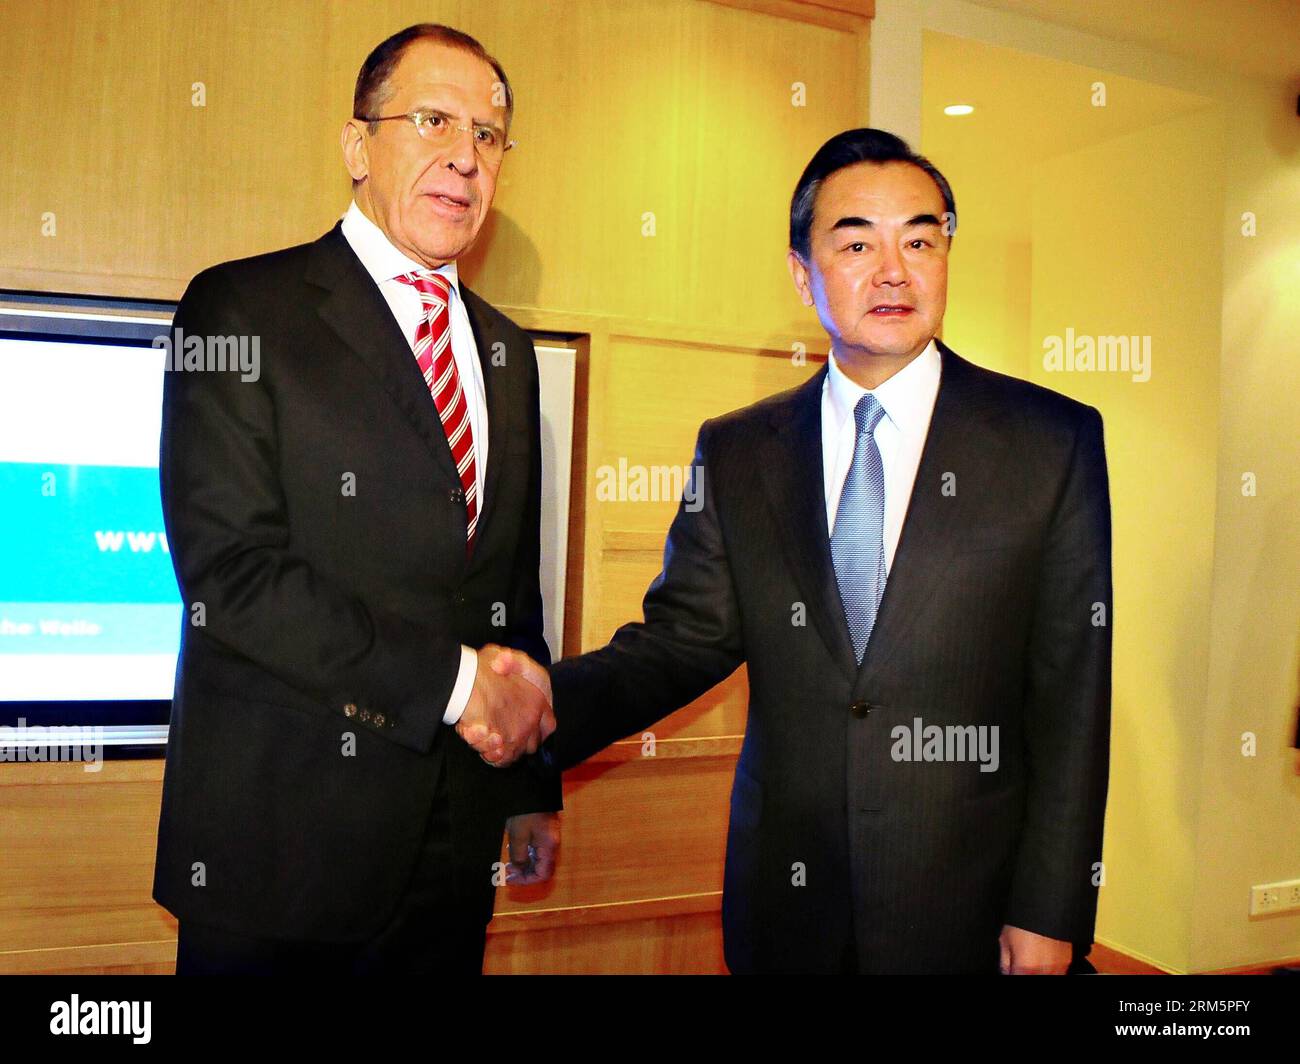 Bildnummer: 60698070  Datum: 10.11.2013  Copyright: imago/Xinhua (131110) -- NEW DELHI, Nov. 10, 2013 (Xinhua) -- Chinese Foreign Minster Wang Yi (R) meets with Russian Foreign Minister Sergei Lavrov in New Delhi, capital of India, Nov. 10, 2013. (Xinhua/Chen Xuelian) INDIA-NEW DELHI-CHINA-RUSSIA-MEETING PUBLICATIONxNOTxINxCHN People xcb x0x 2013 quer premiumd      60698070 Date 10 11 2013 Copyright Imago XINHUA 131110 New Delhi Nov 10 2013 XINHUA Chinese Foreign Minster Wang Yi r Meets With Russian Foreign Ministers Sergei Lavrov in New Delhi Capital of India Nov 10 2013 XINHUA Chen  India Ne Stock Photo